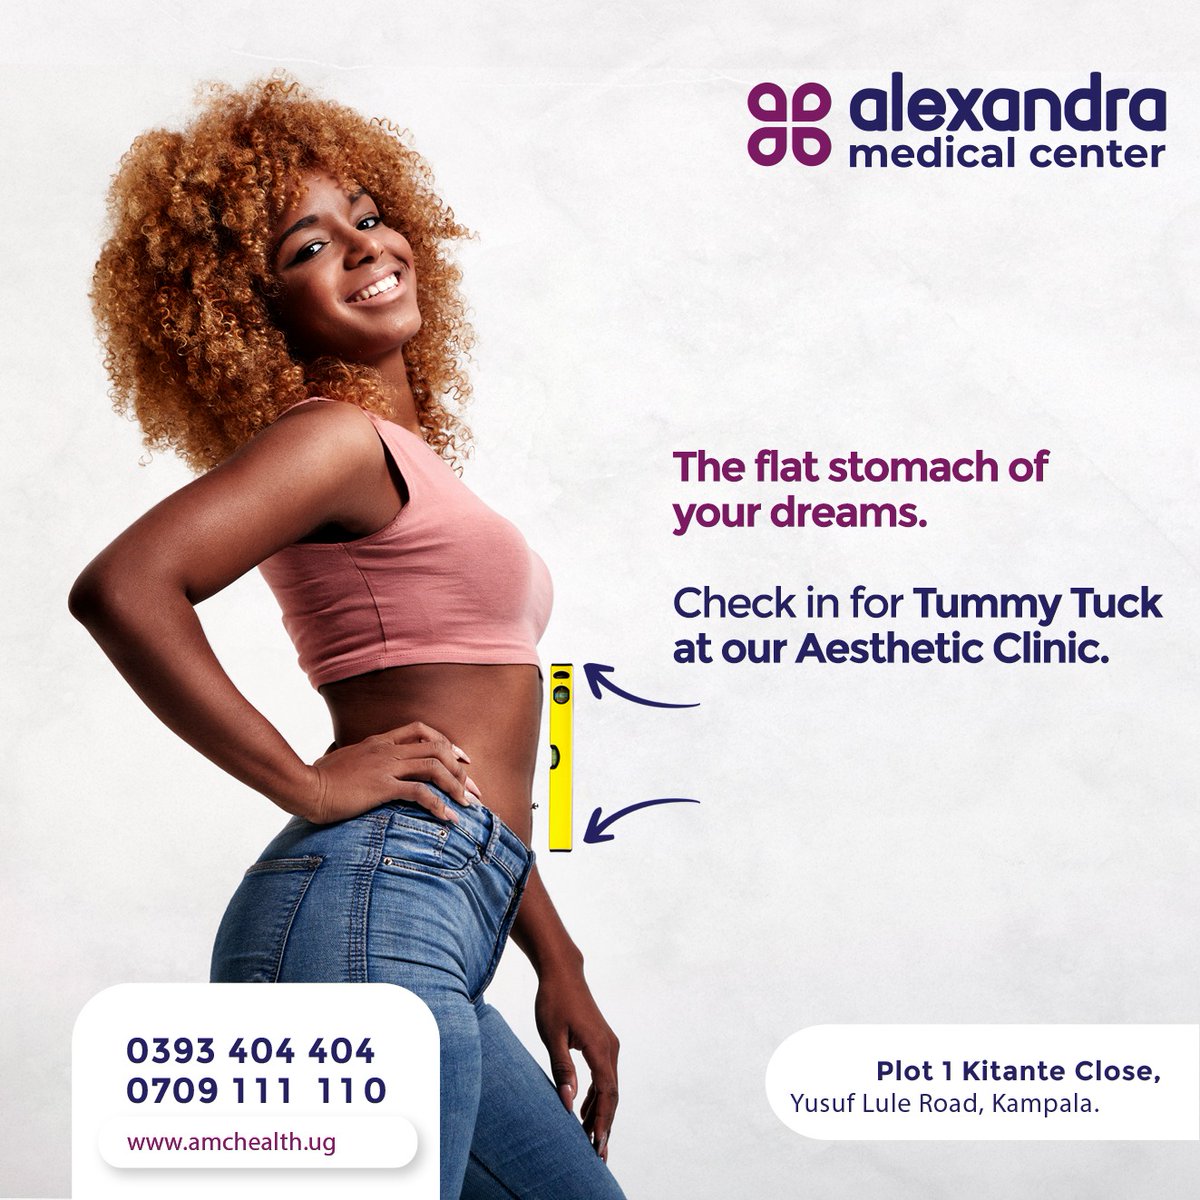 Count on us to give you that flat tummy!

You can check in at our Aesthetic Clinic for Tummy Tuck and have the stomach size you have always wanted.

#TummyTuck #ThursdayMotivaton #AestheticClinic